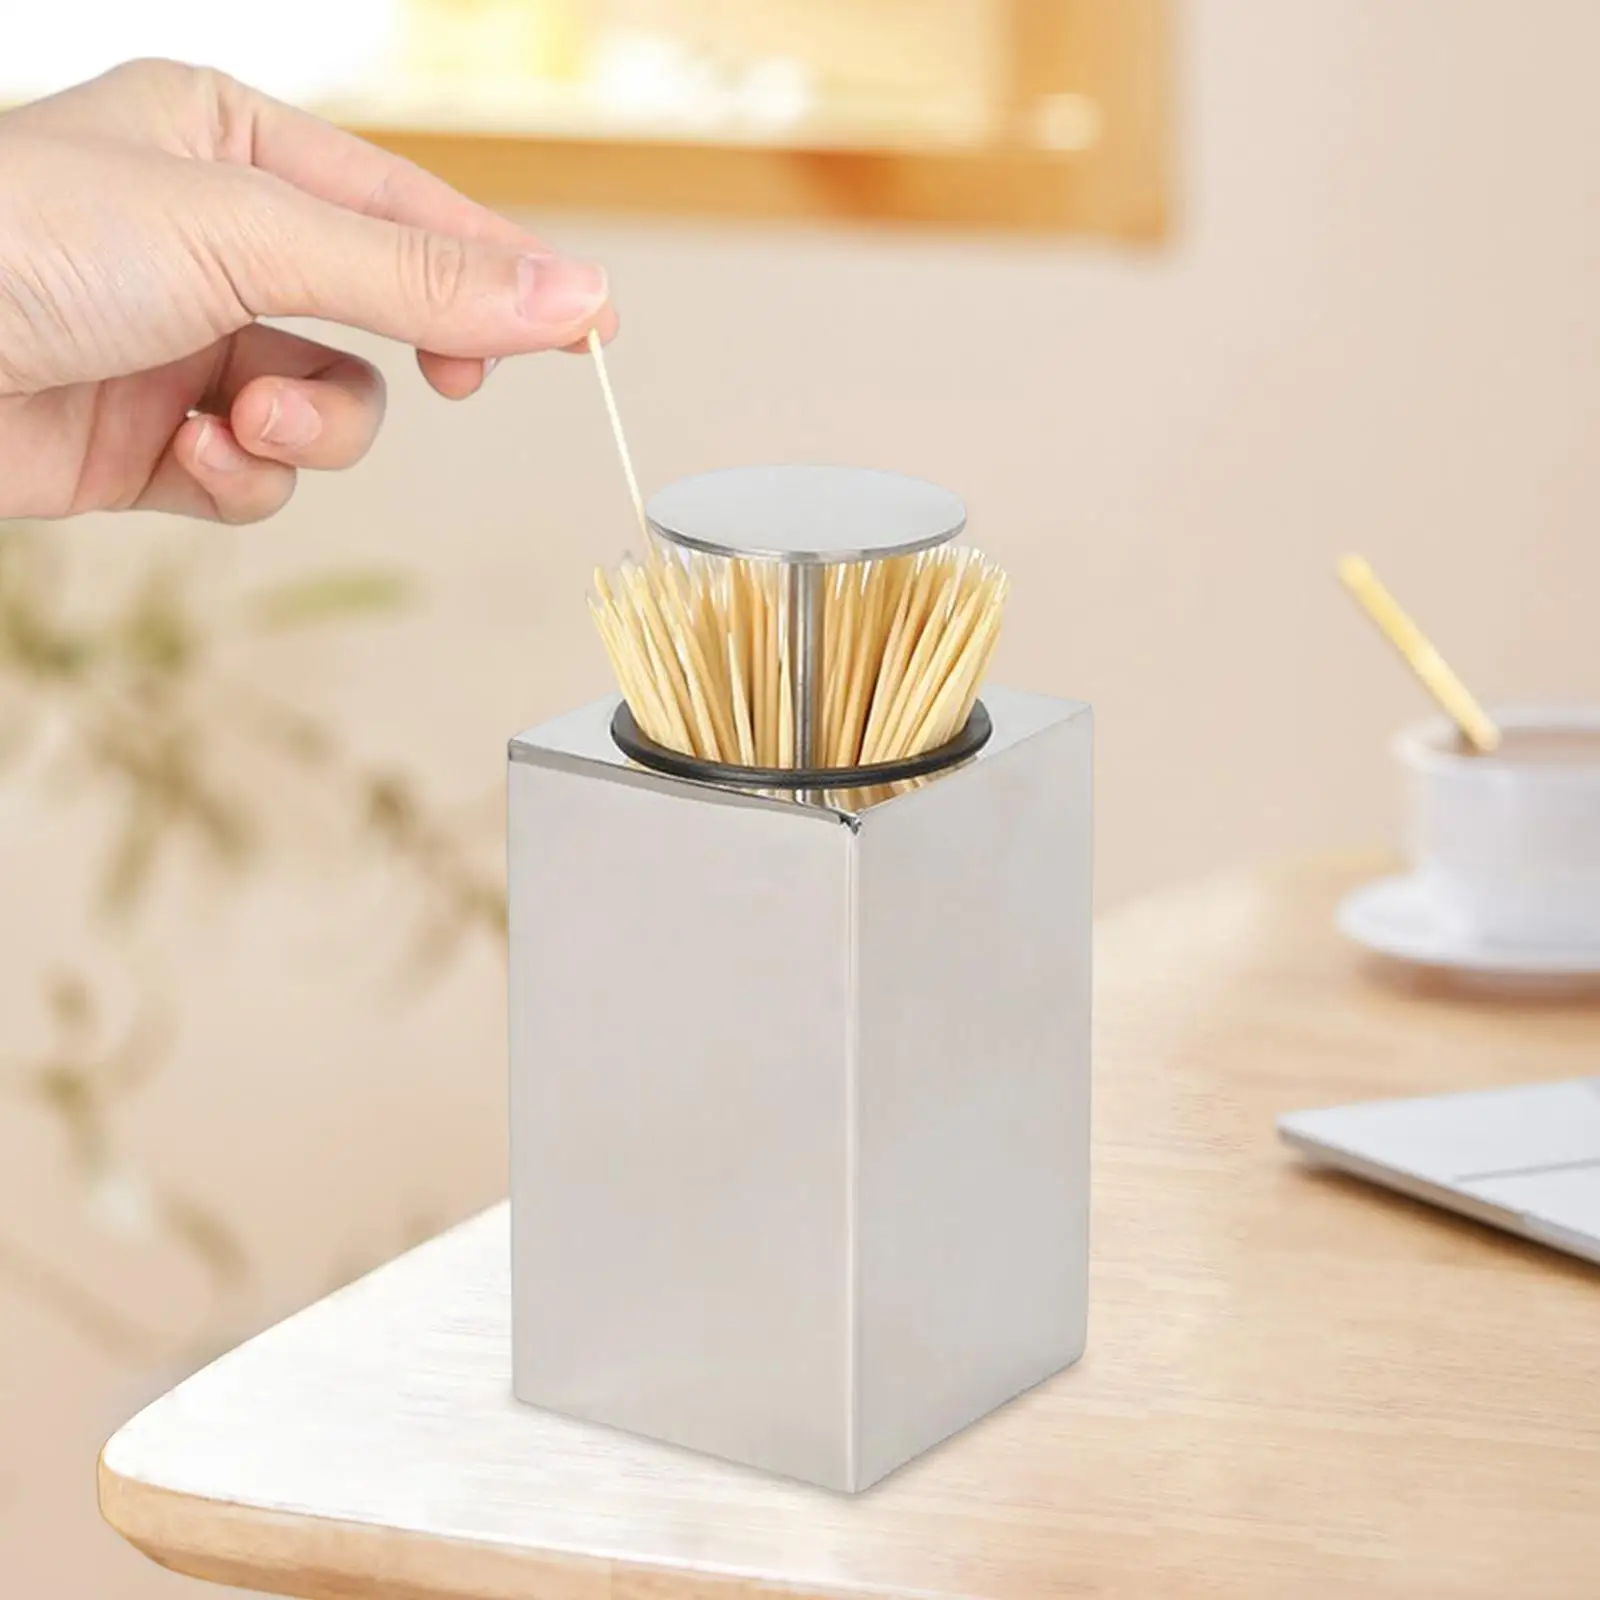 Toothpick Dispenser Retractable Push Button Top for Living rooms fun Gifts